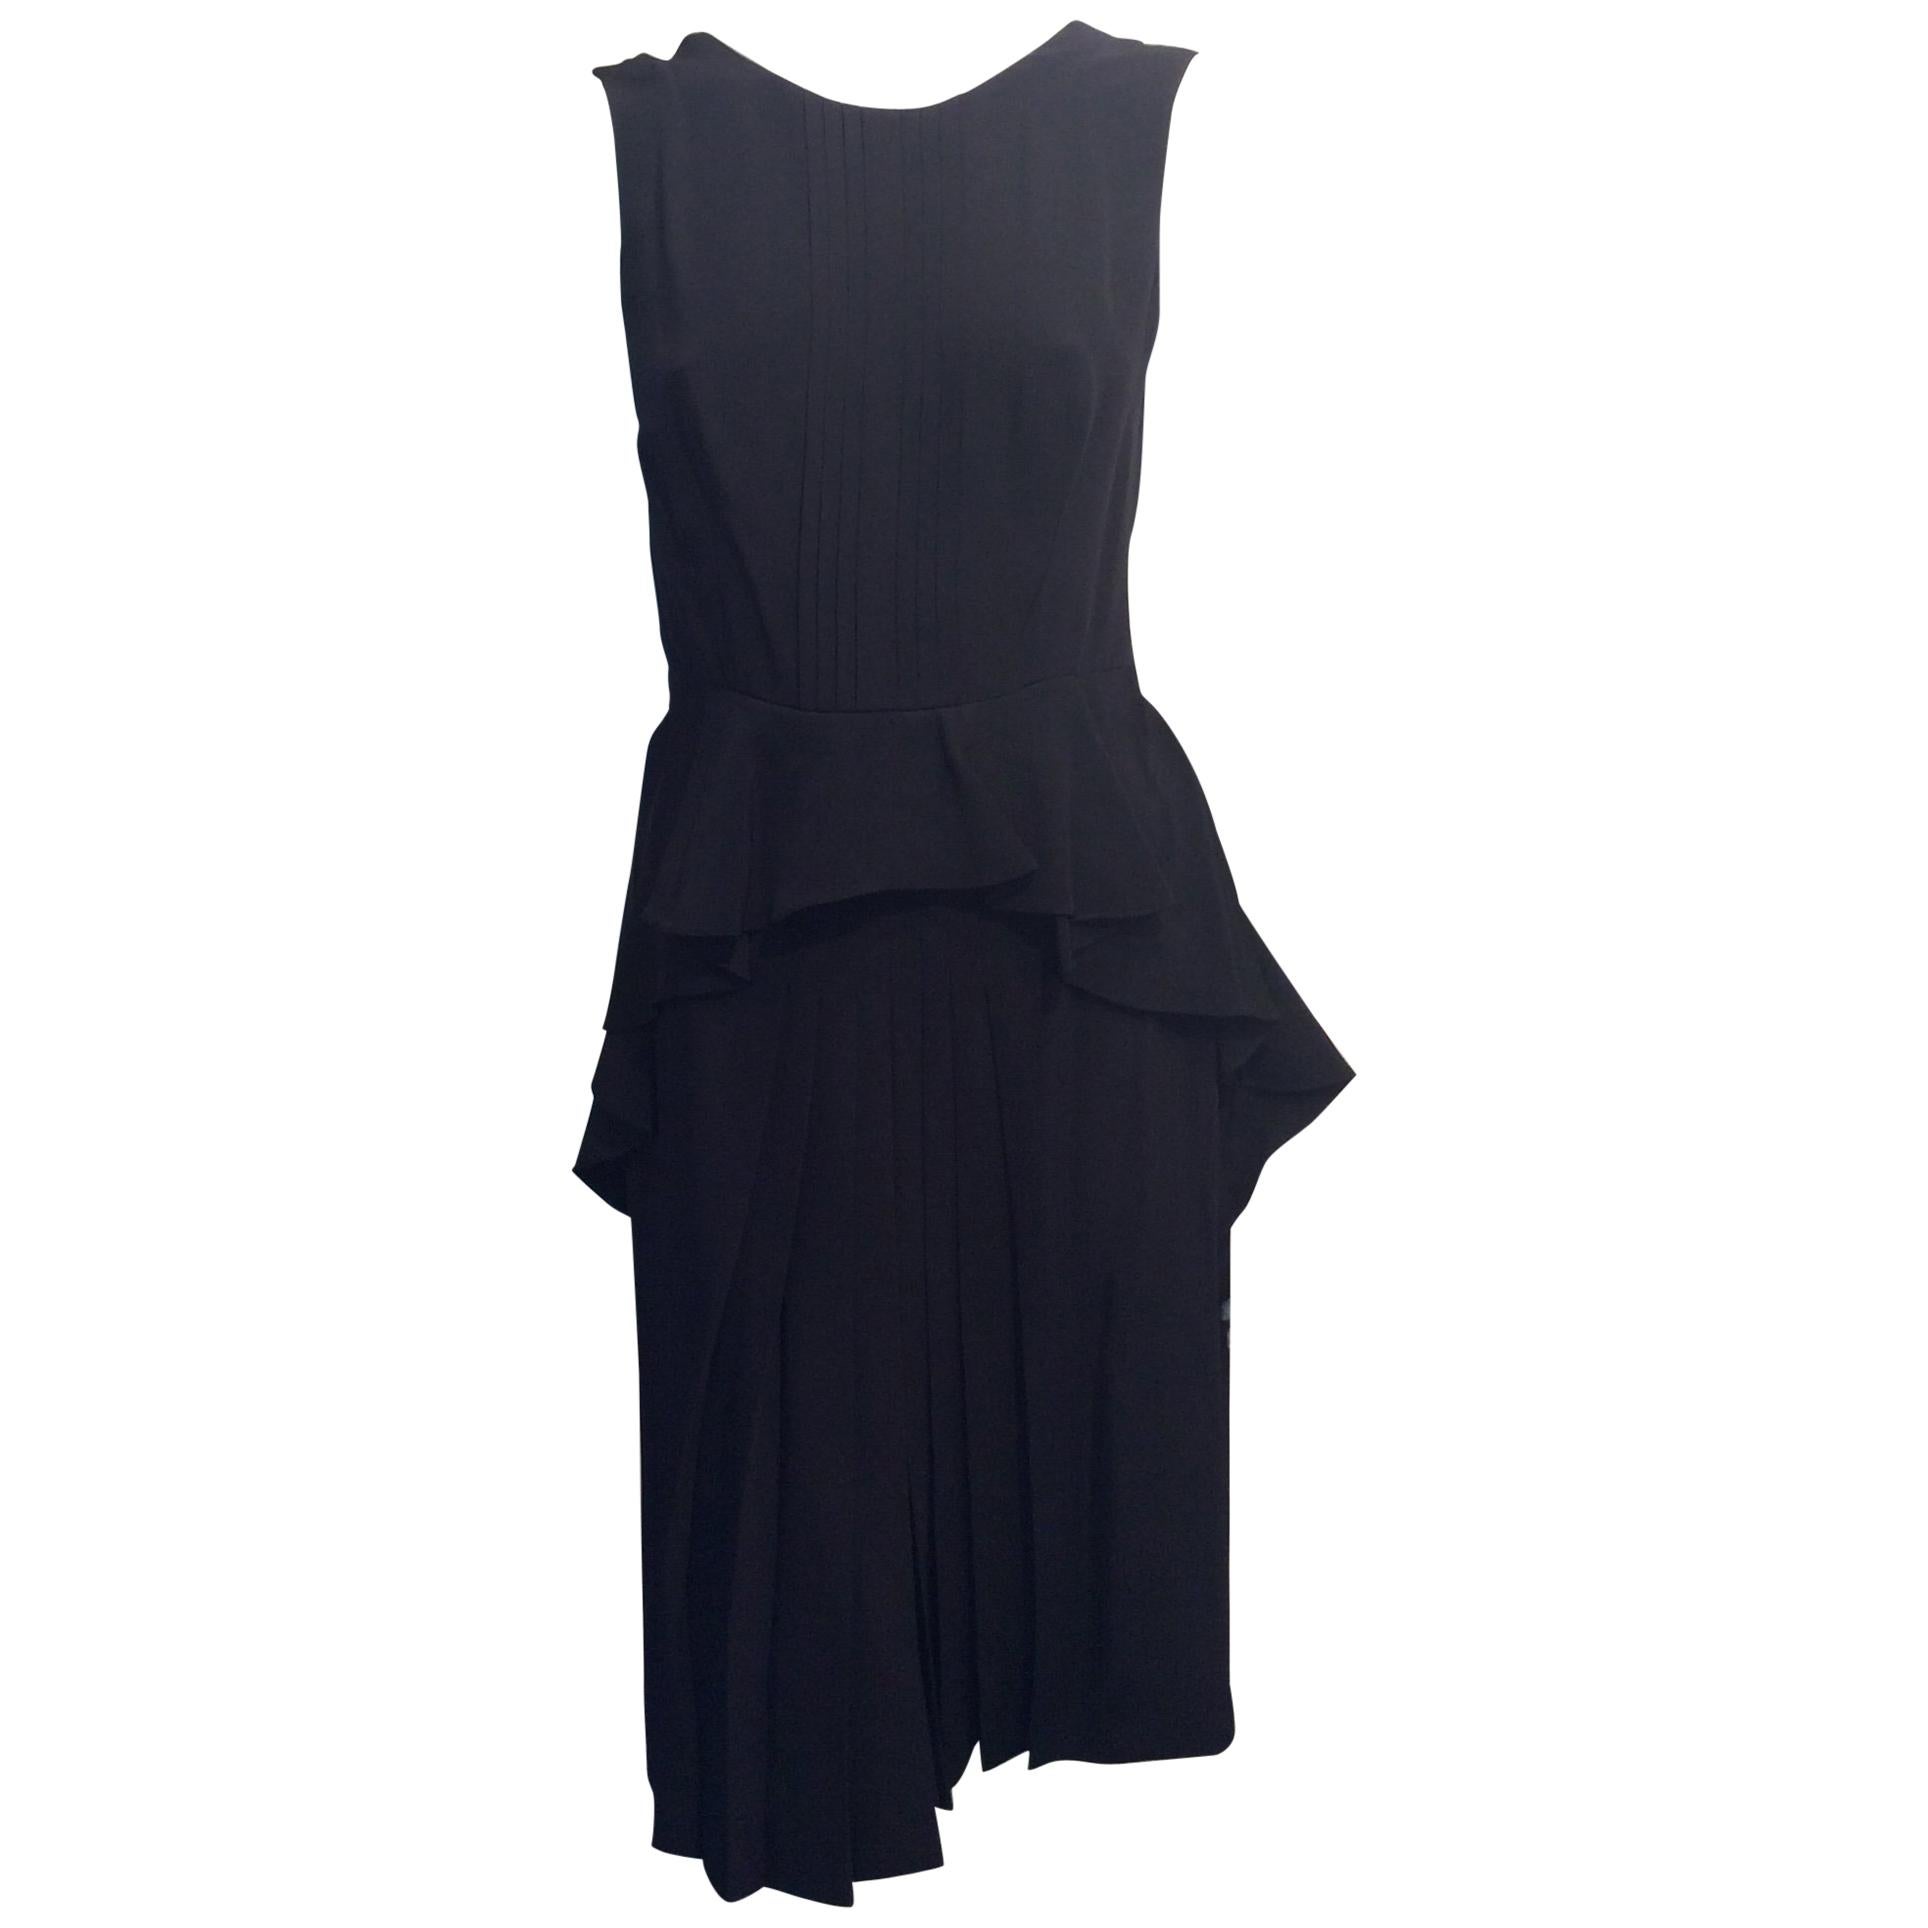 New Prada Black Silk Dress with Draping at Hips and Front Pleating Sz 42/Us6 For Sale